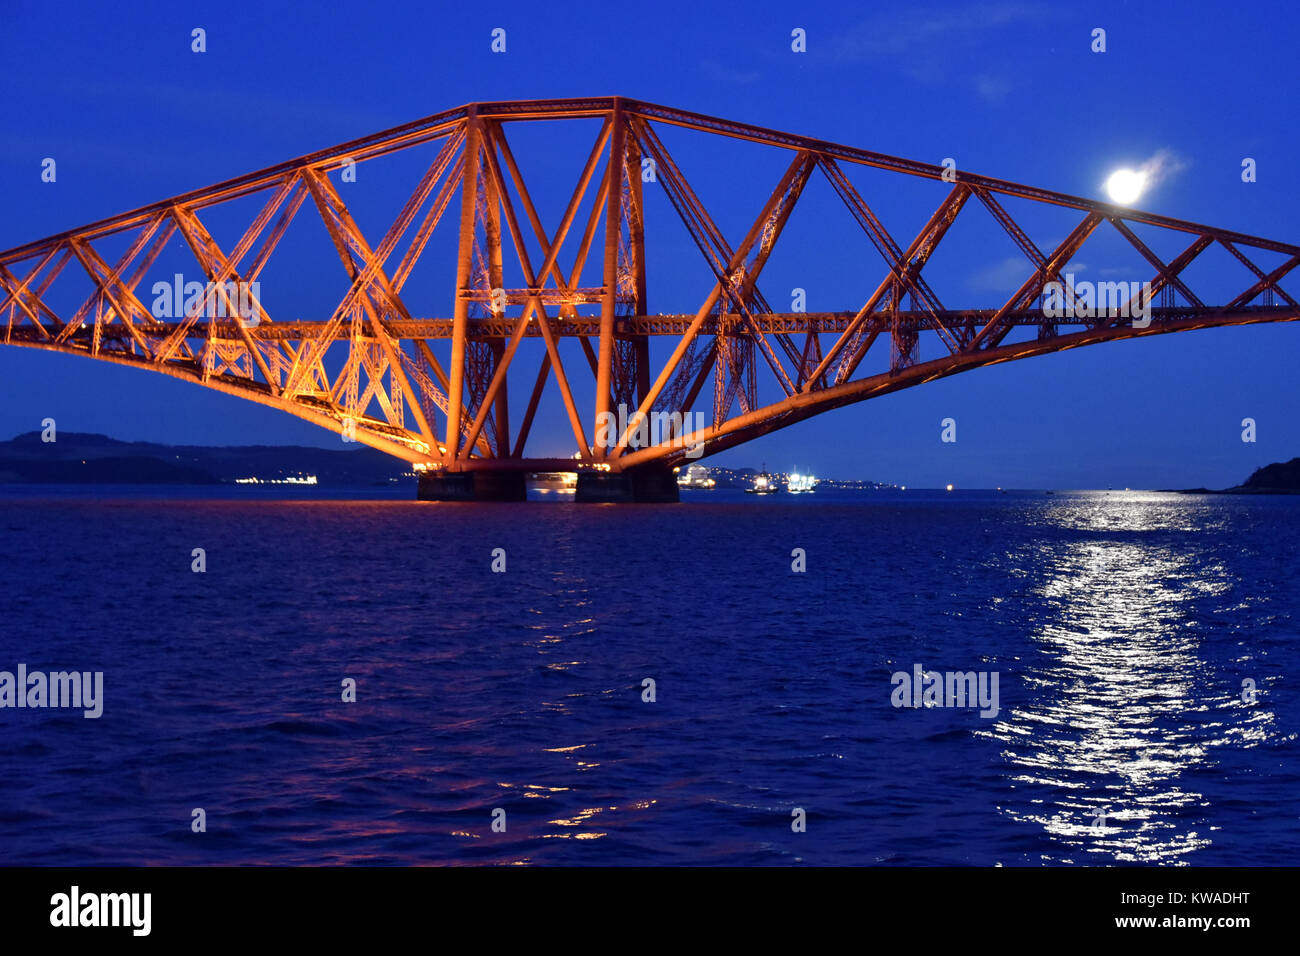 Edinburgh, Scotland, United Kingdom. 01st Jan, 2018. The January full moon - known as the 'wolf moon' - is reflected in the waters of the Forth Estuary as it rises behind the Forth Bridge on New Year's Day, Credit: Ken Jack/Alamy Live News Stock Photo